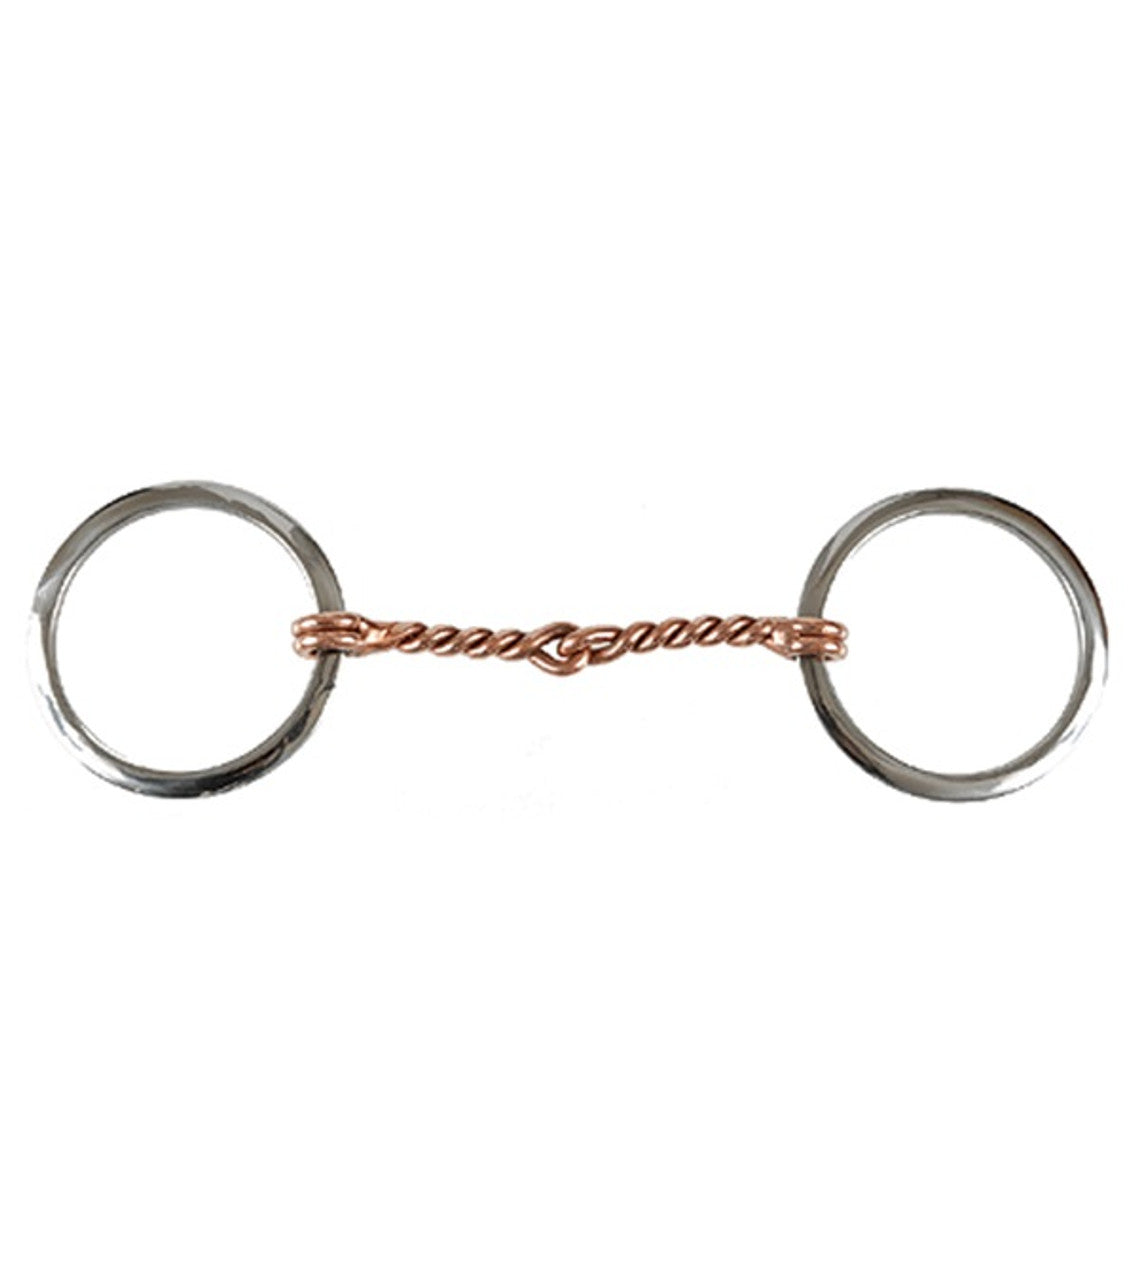 Professional's Choice Equisential O Ring Twisted Wire Dogbone Snaffle Bit